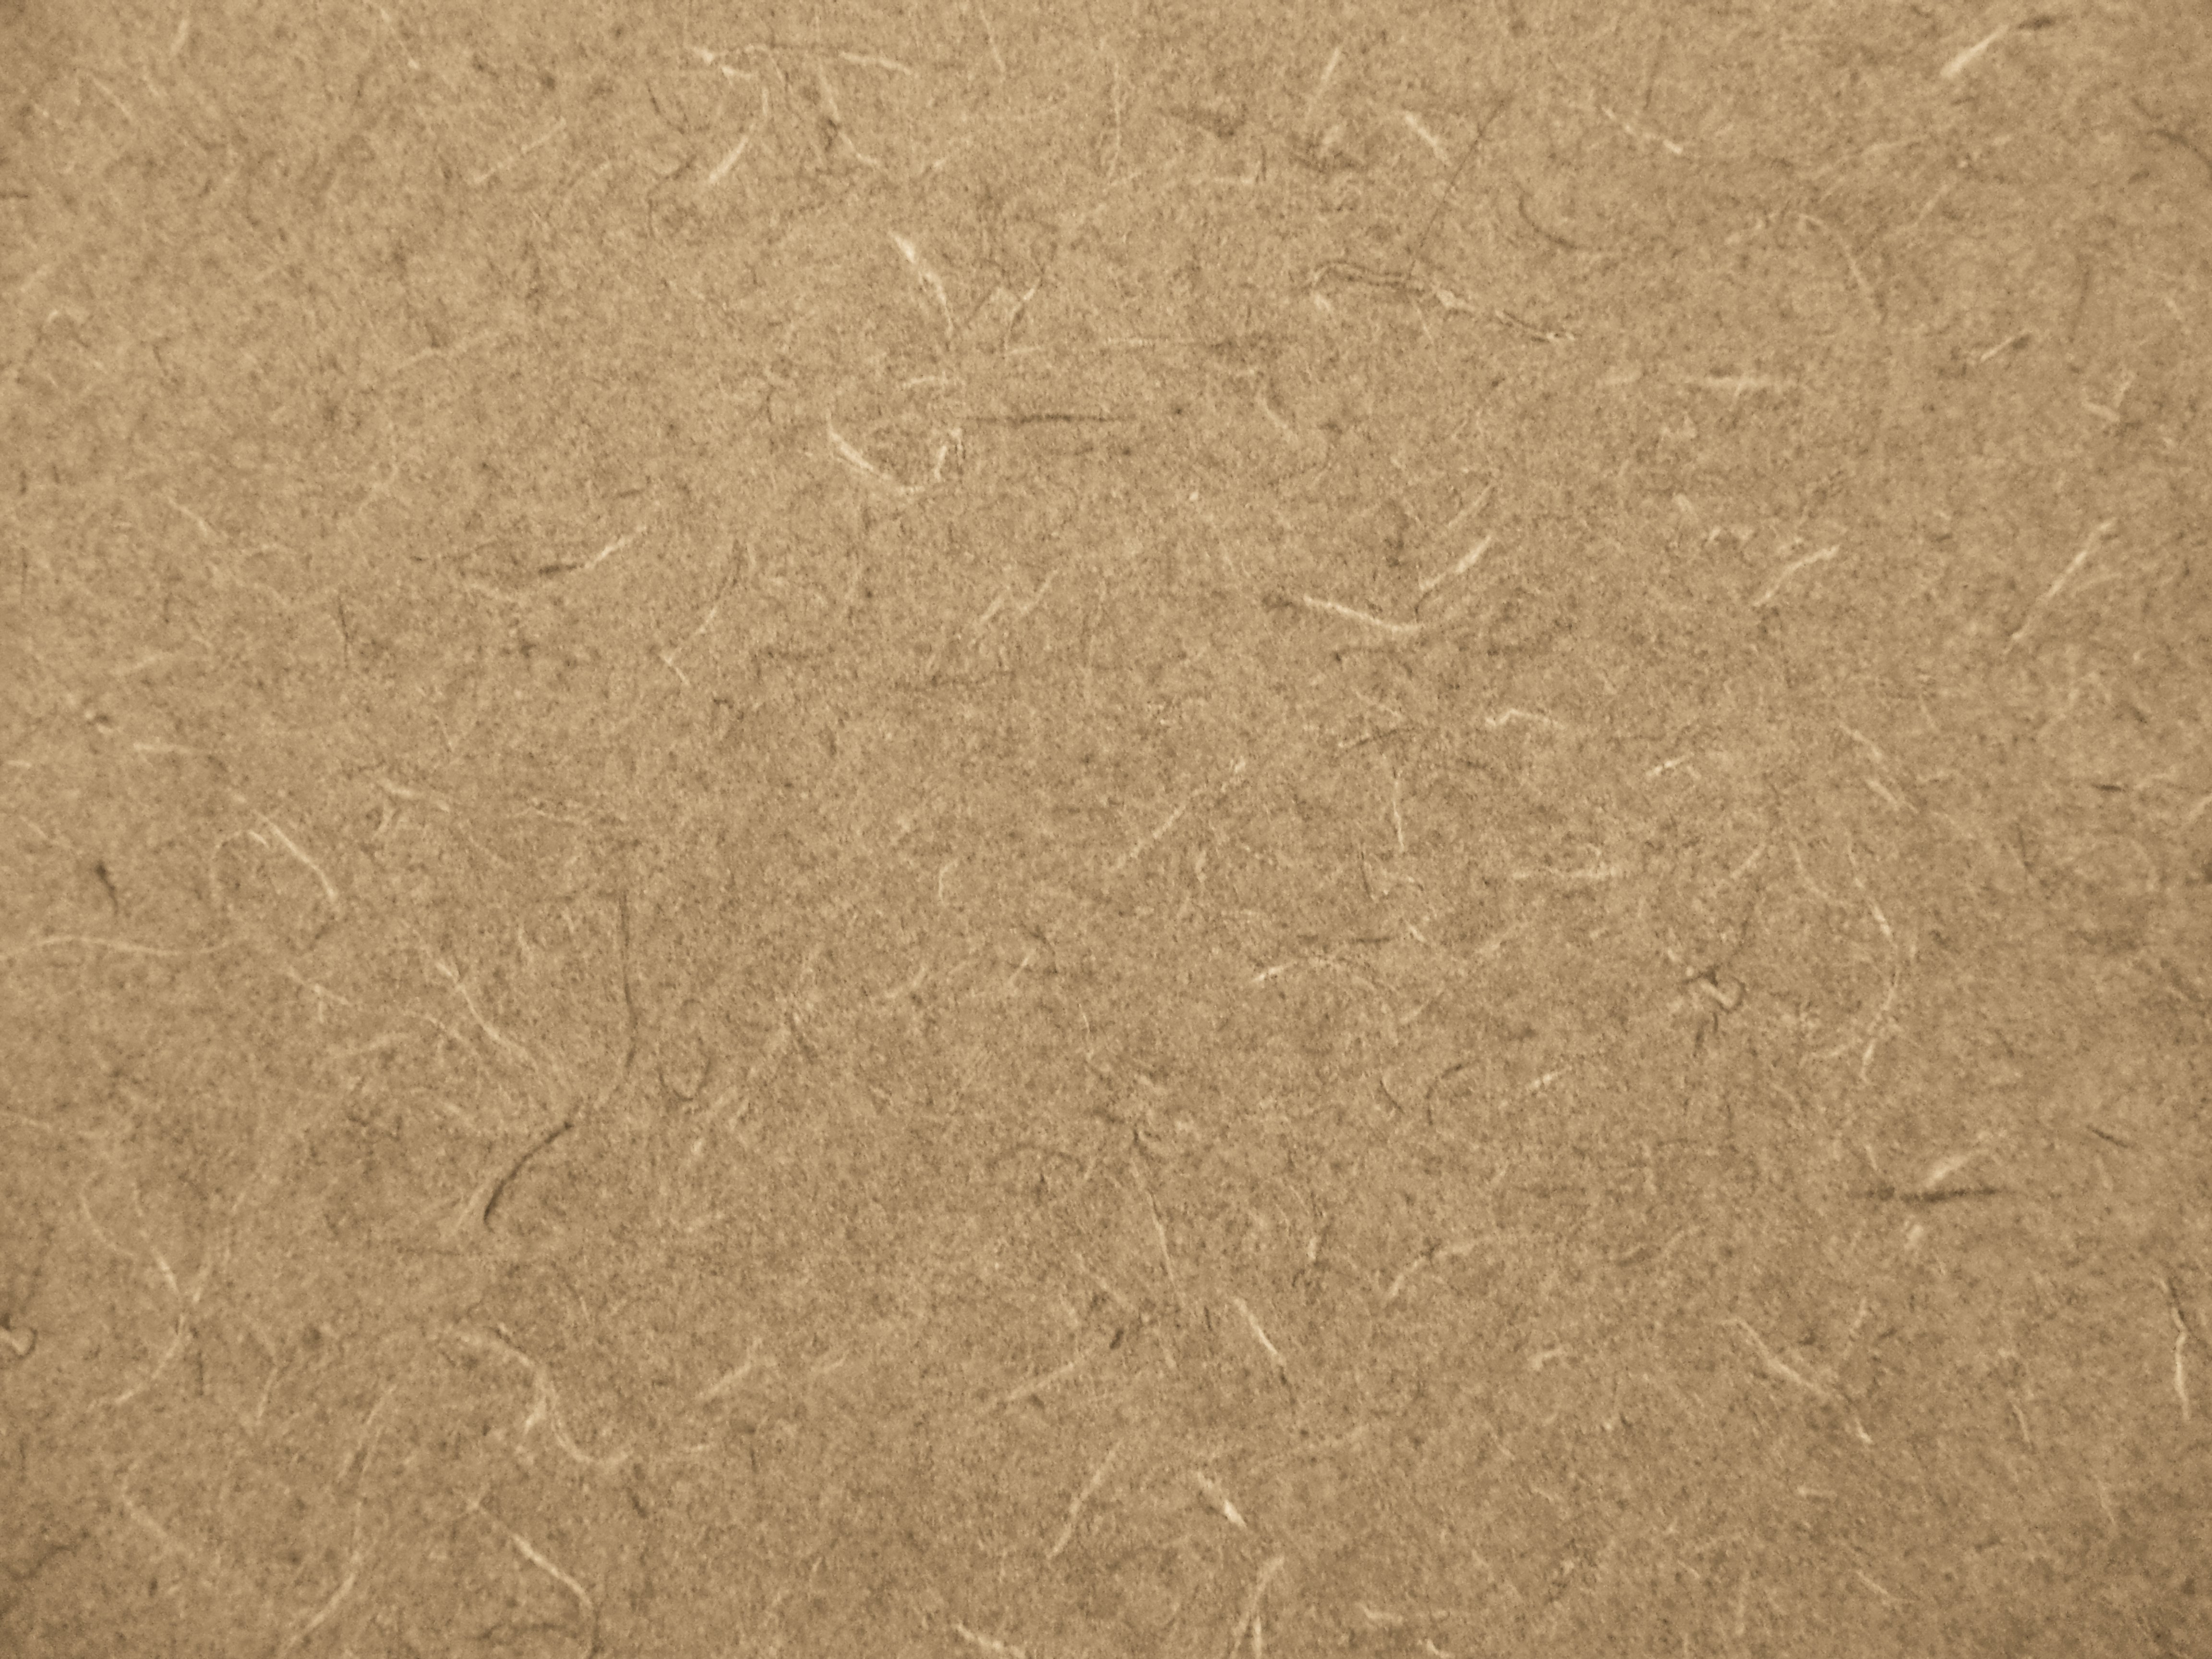 Tan Abstract Pattern Laminate Countertop Texture Picture | Free ...